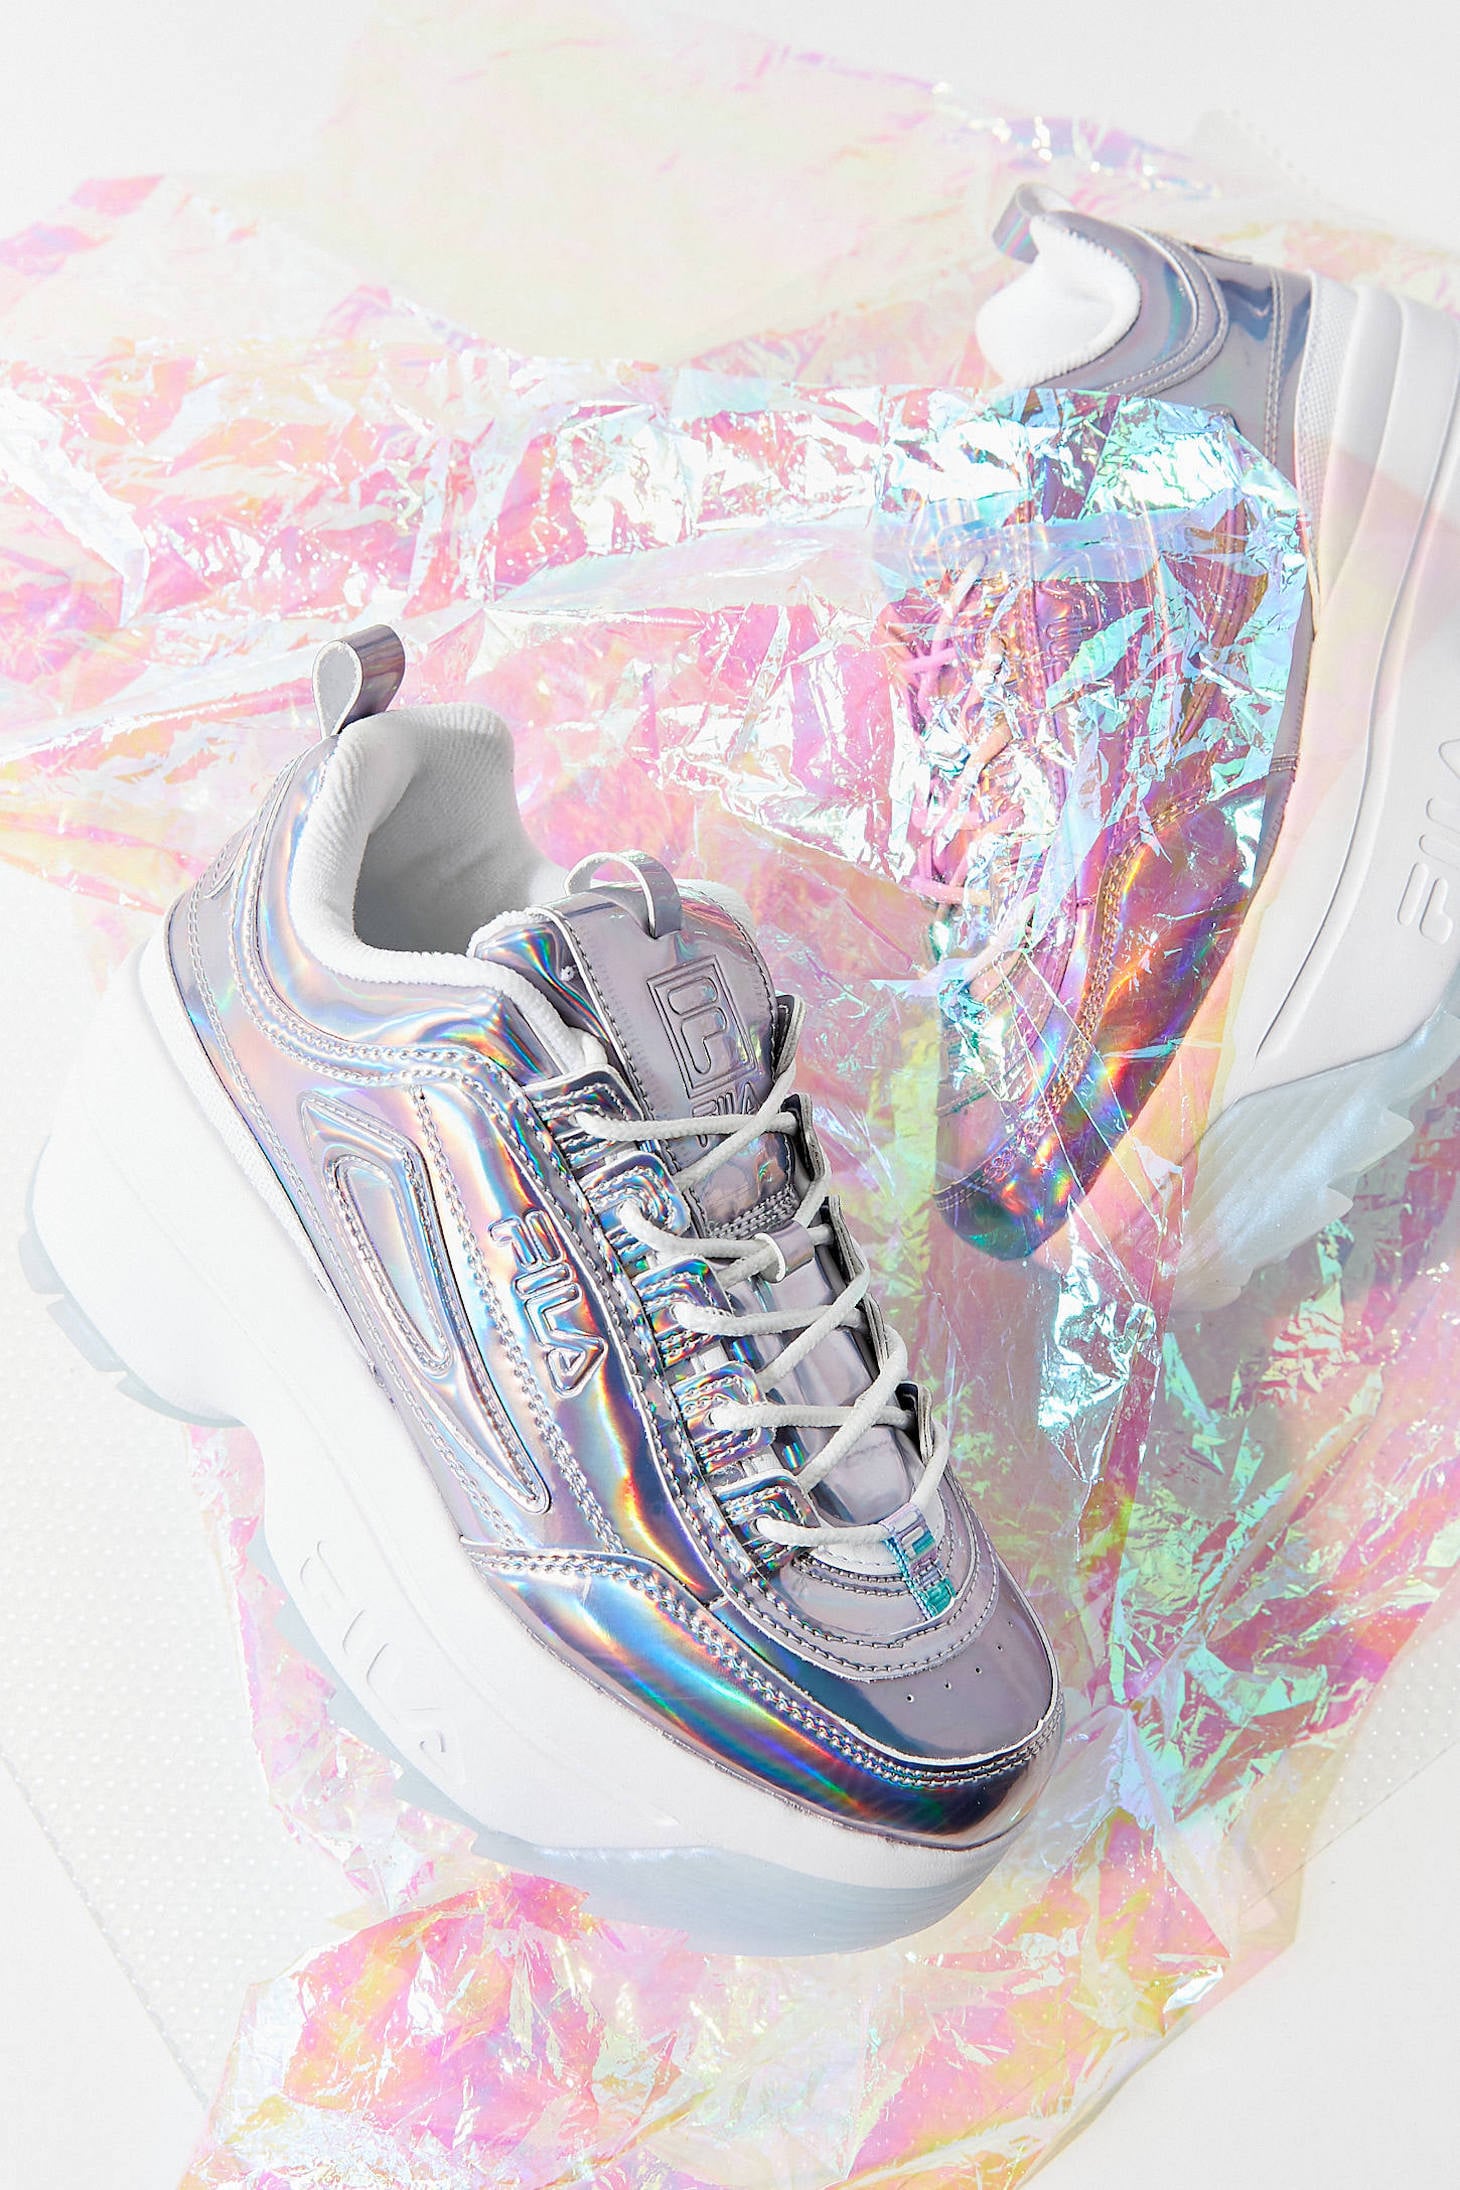 holographic sneakers target